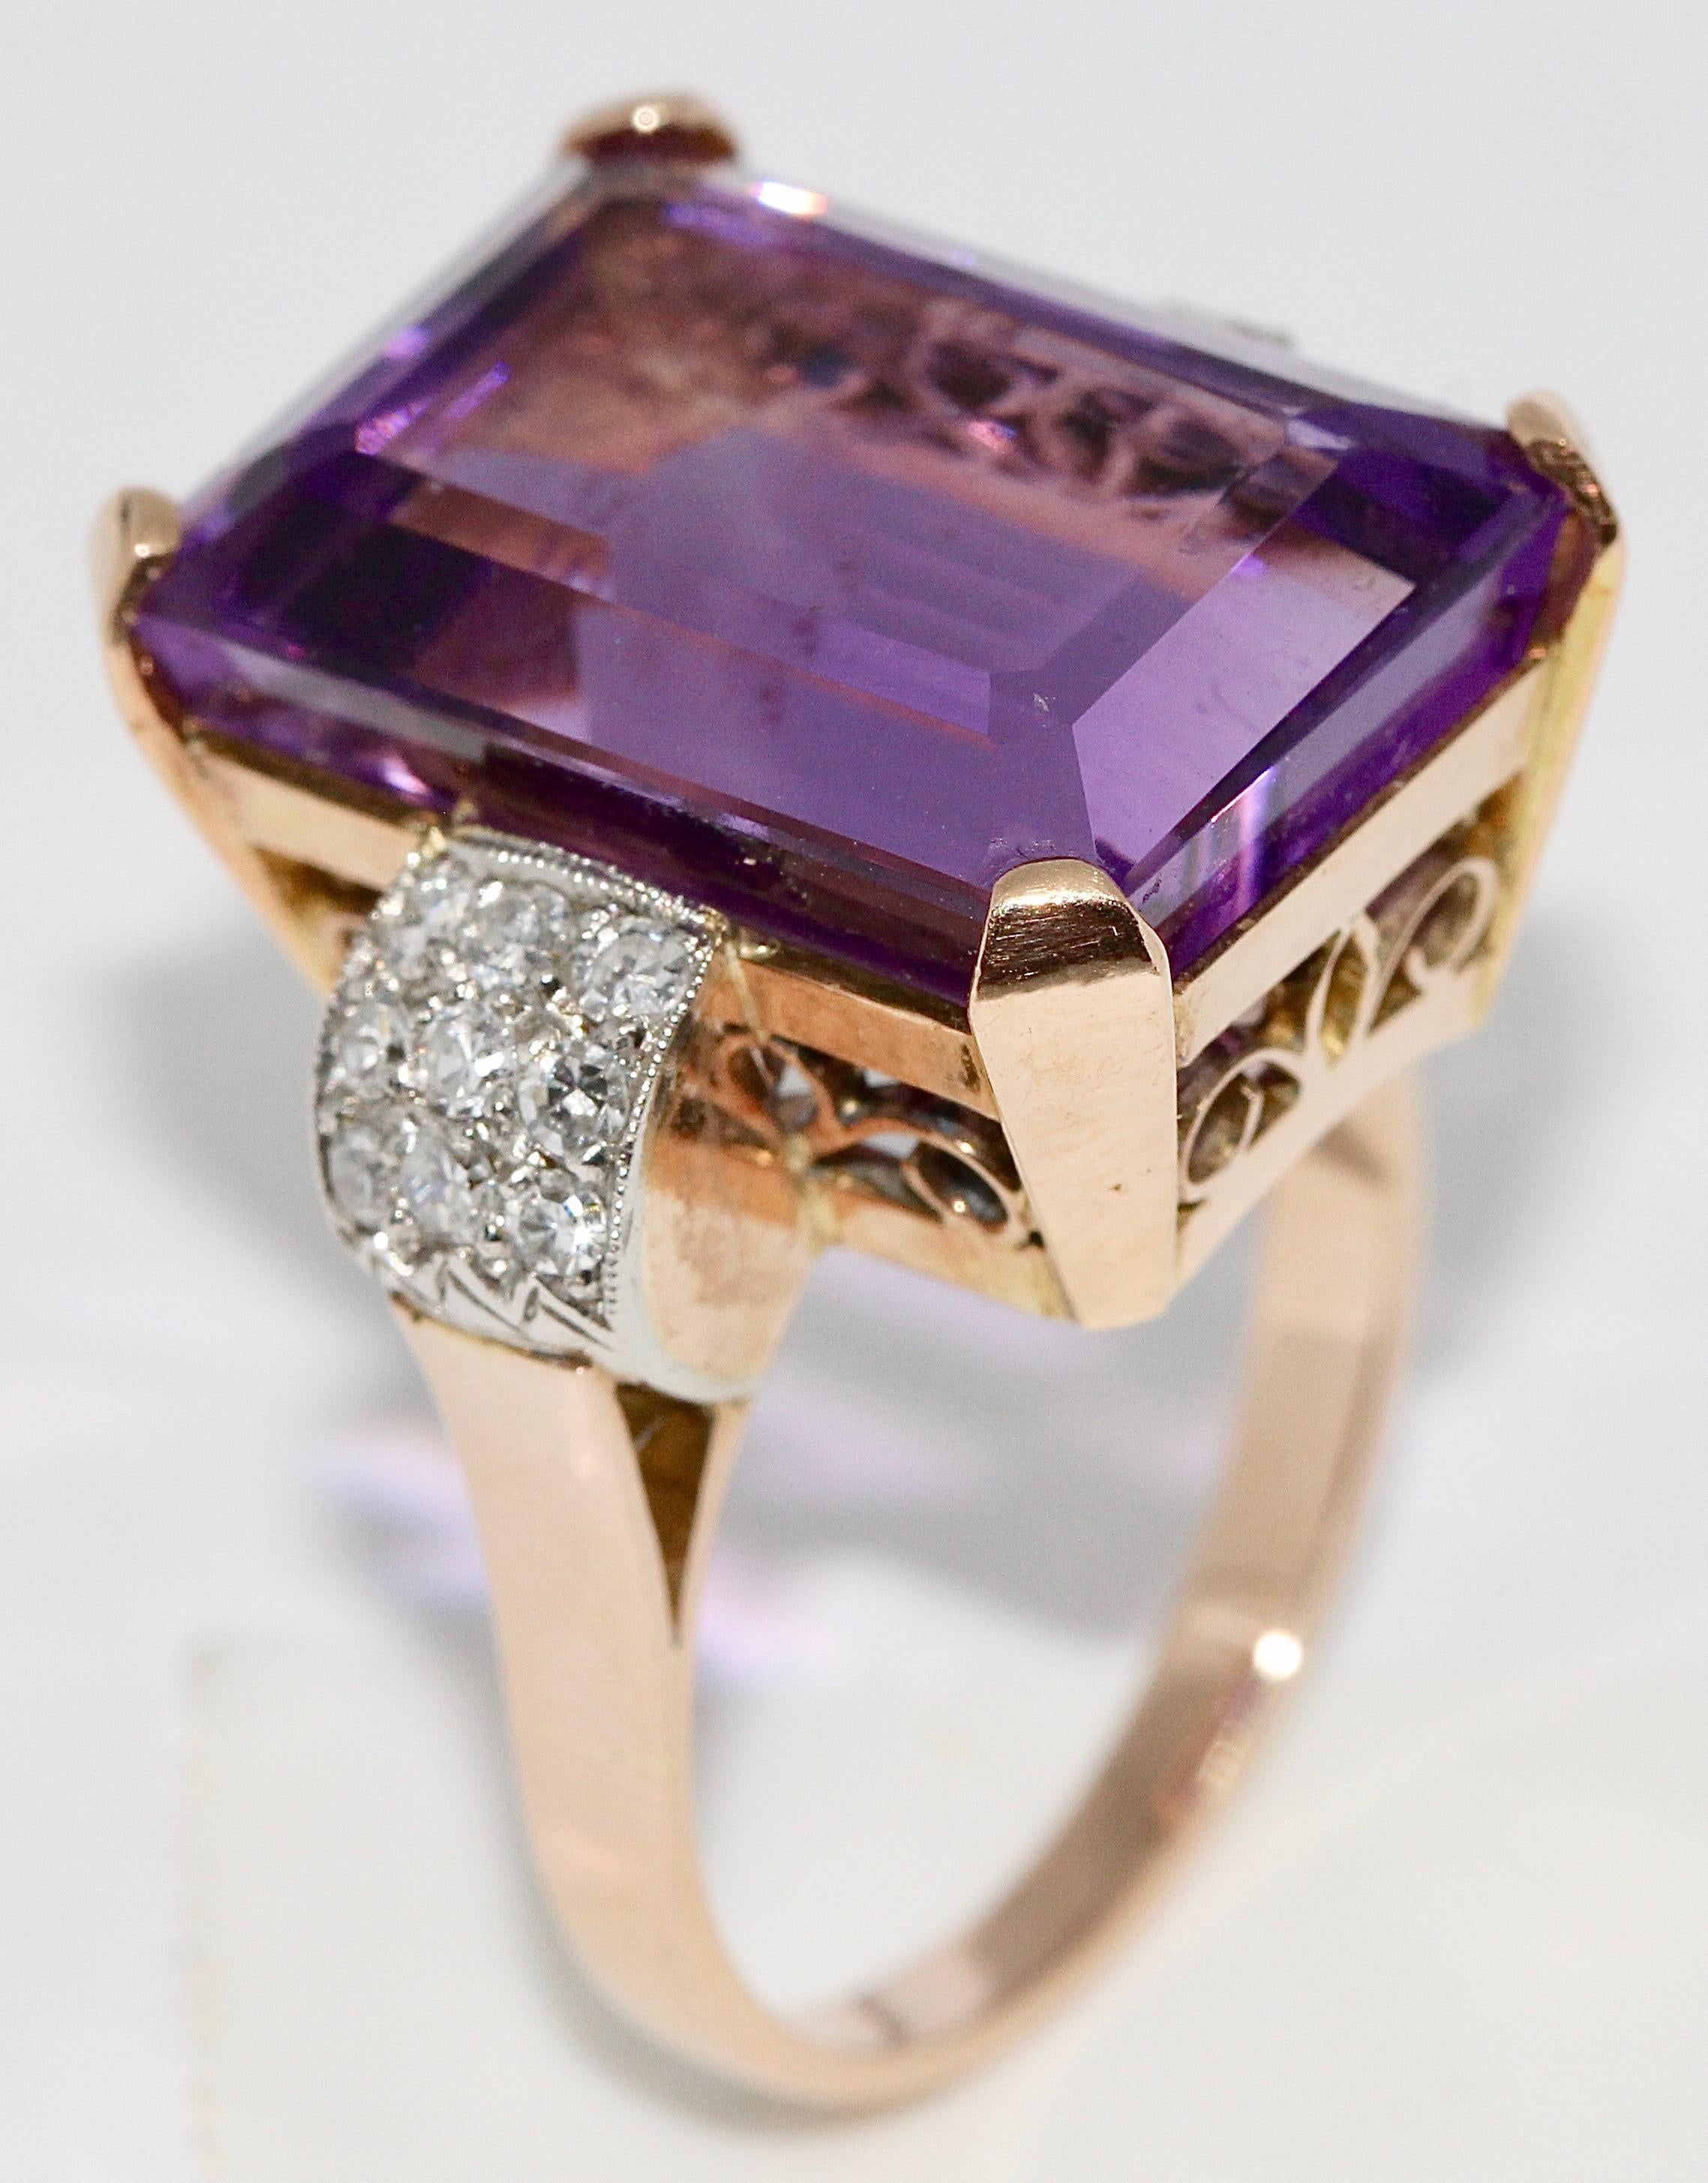 Beautiful, antique amethyst ring, rose gold with diamonds.

US Ring size 7